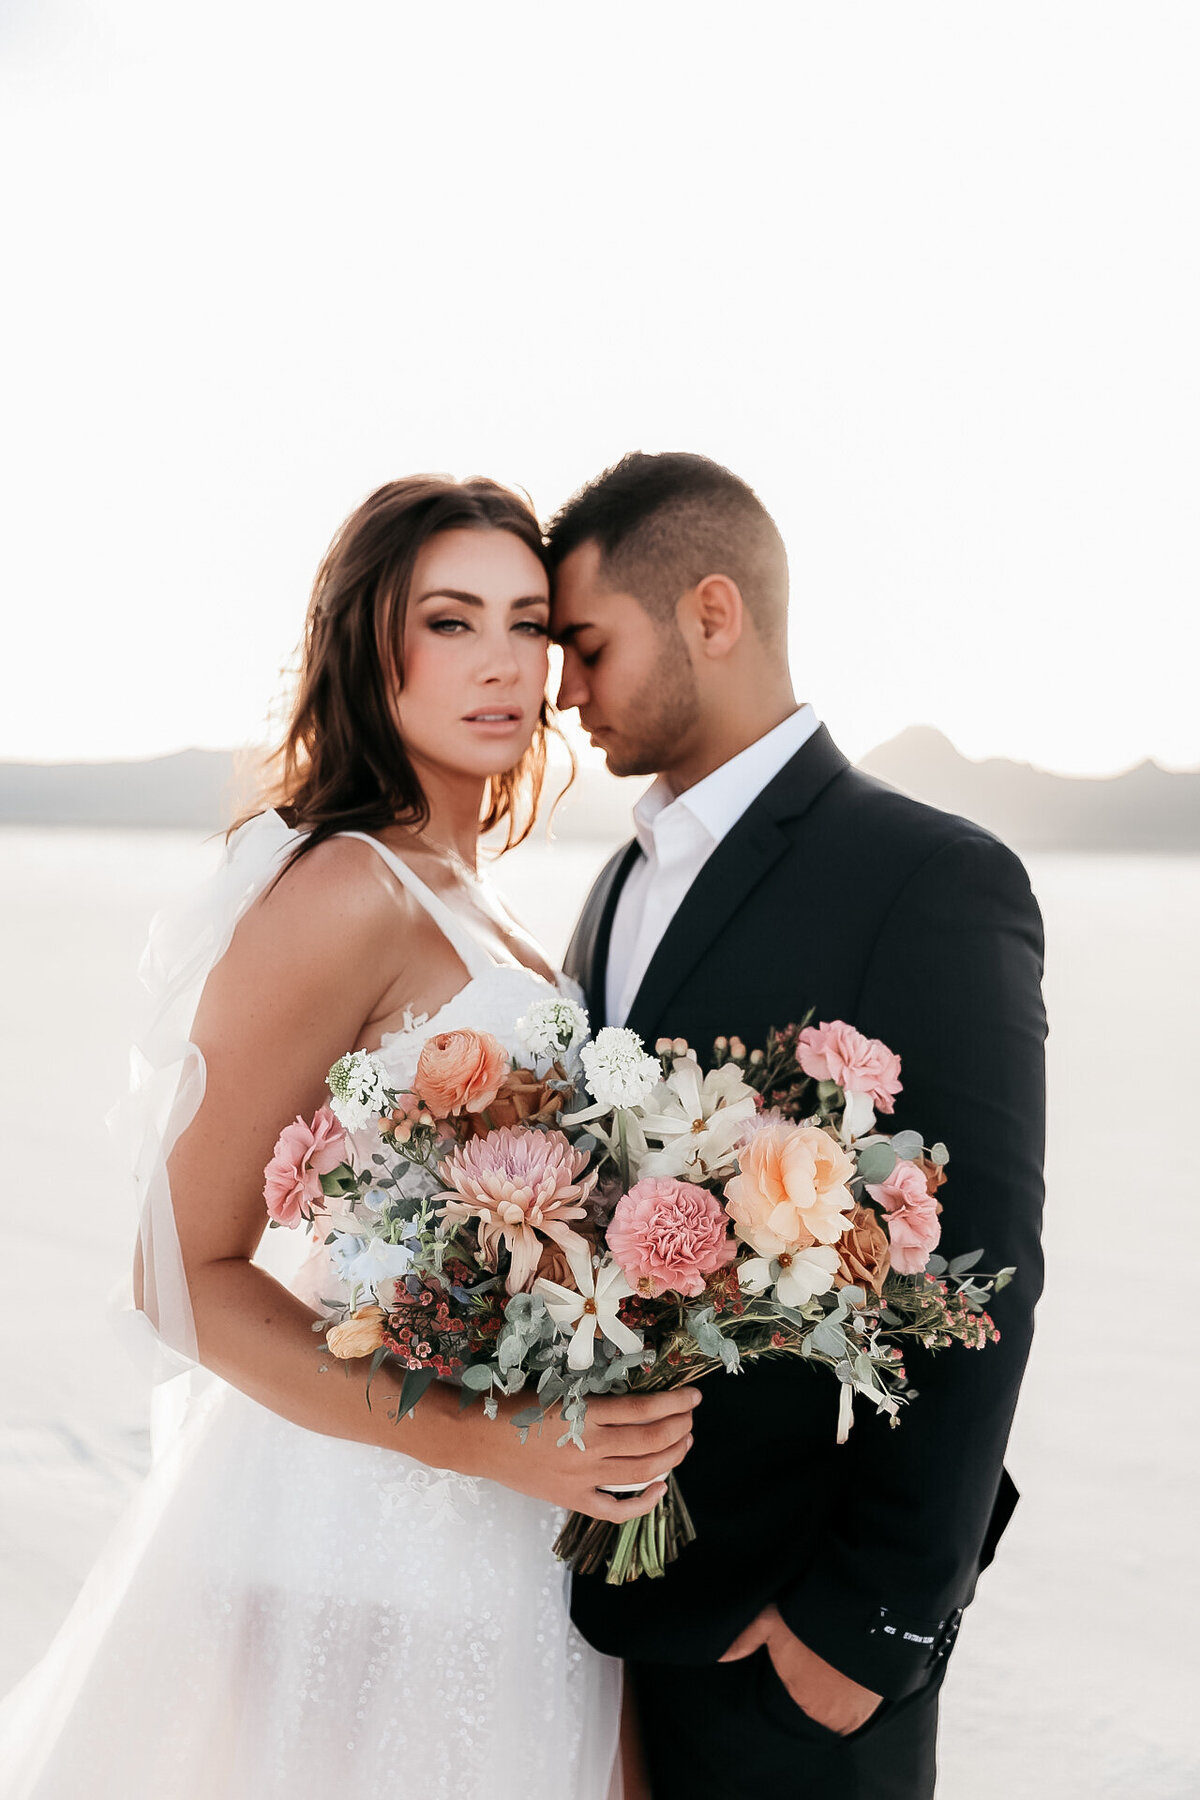 Salt Flats Utah editorial shoot with bride and groom and colorful bouquet.